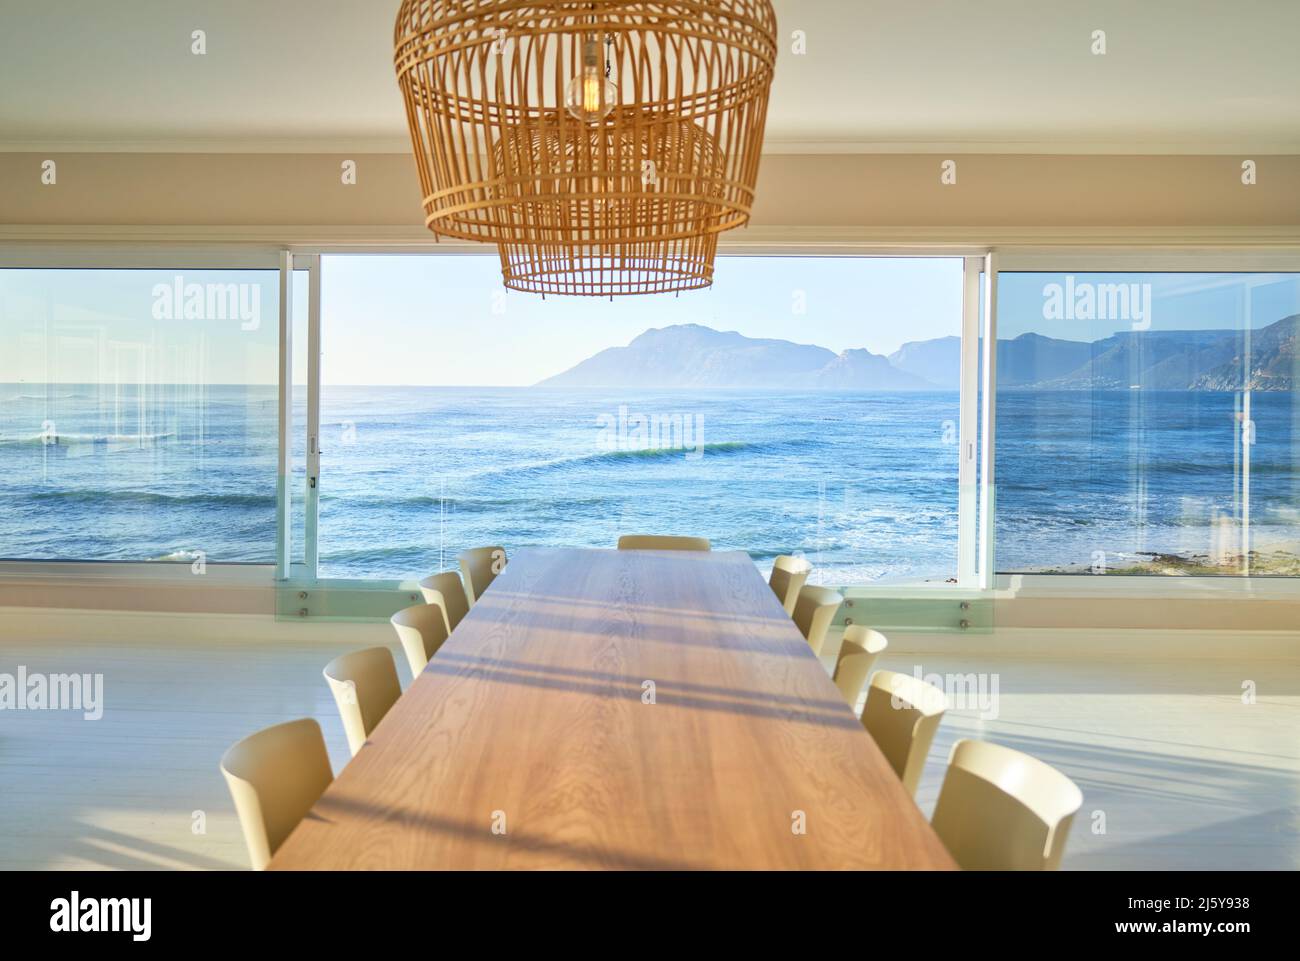 Rattan pendant lights over dining table with scenic ocean view Stock Photo